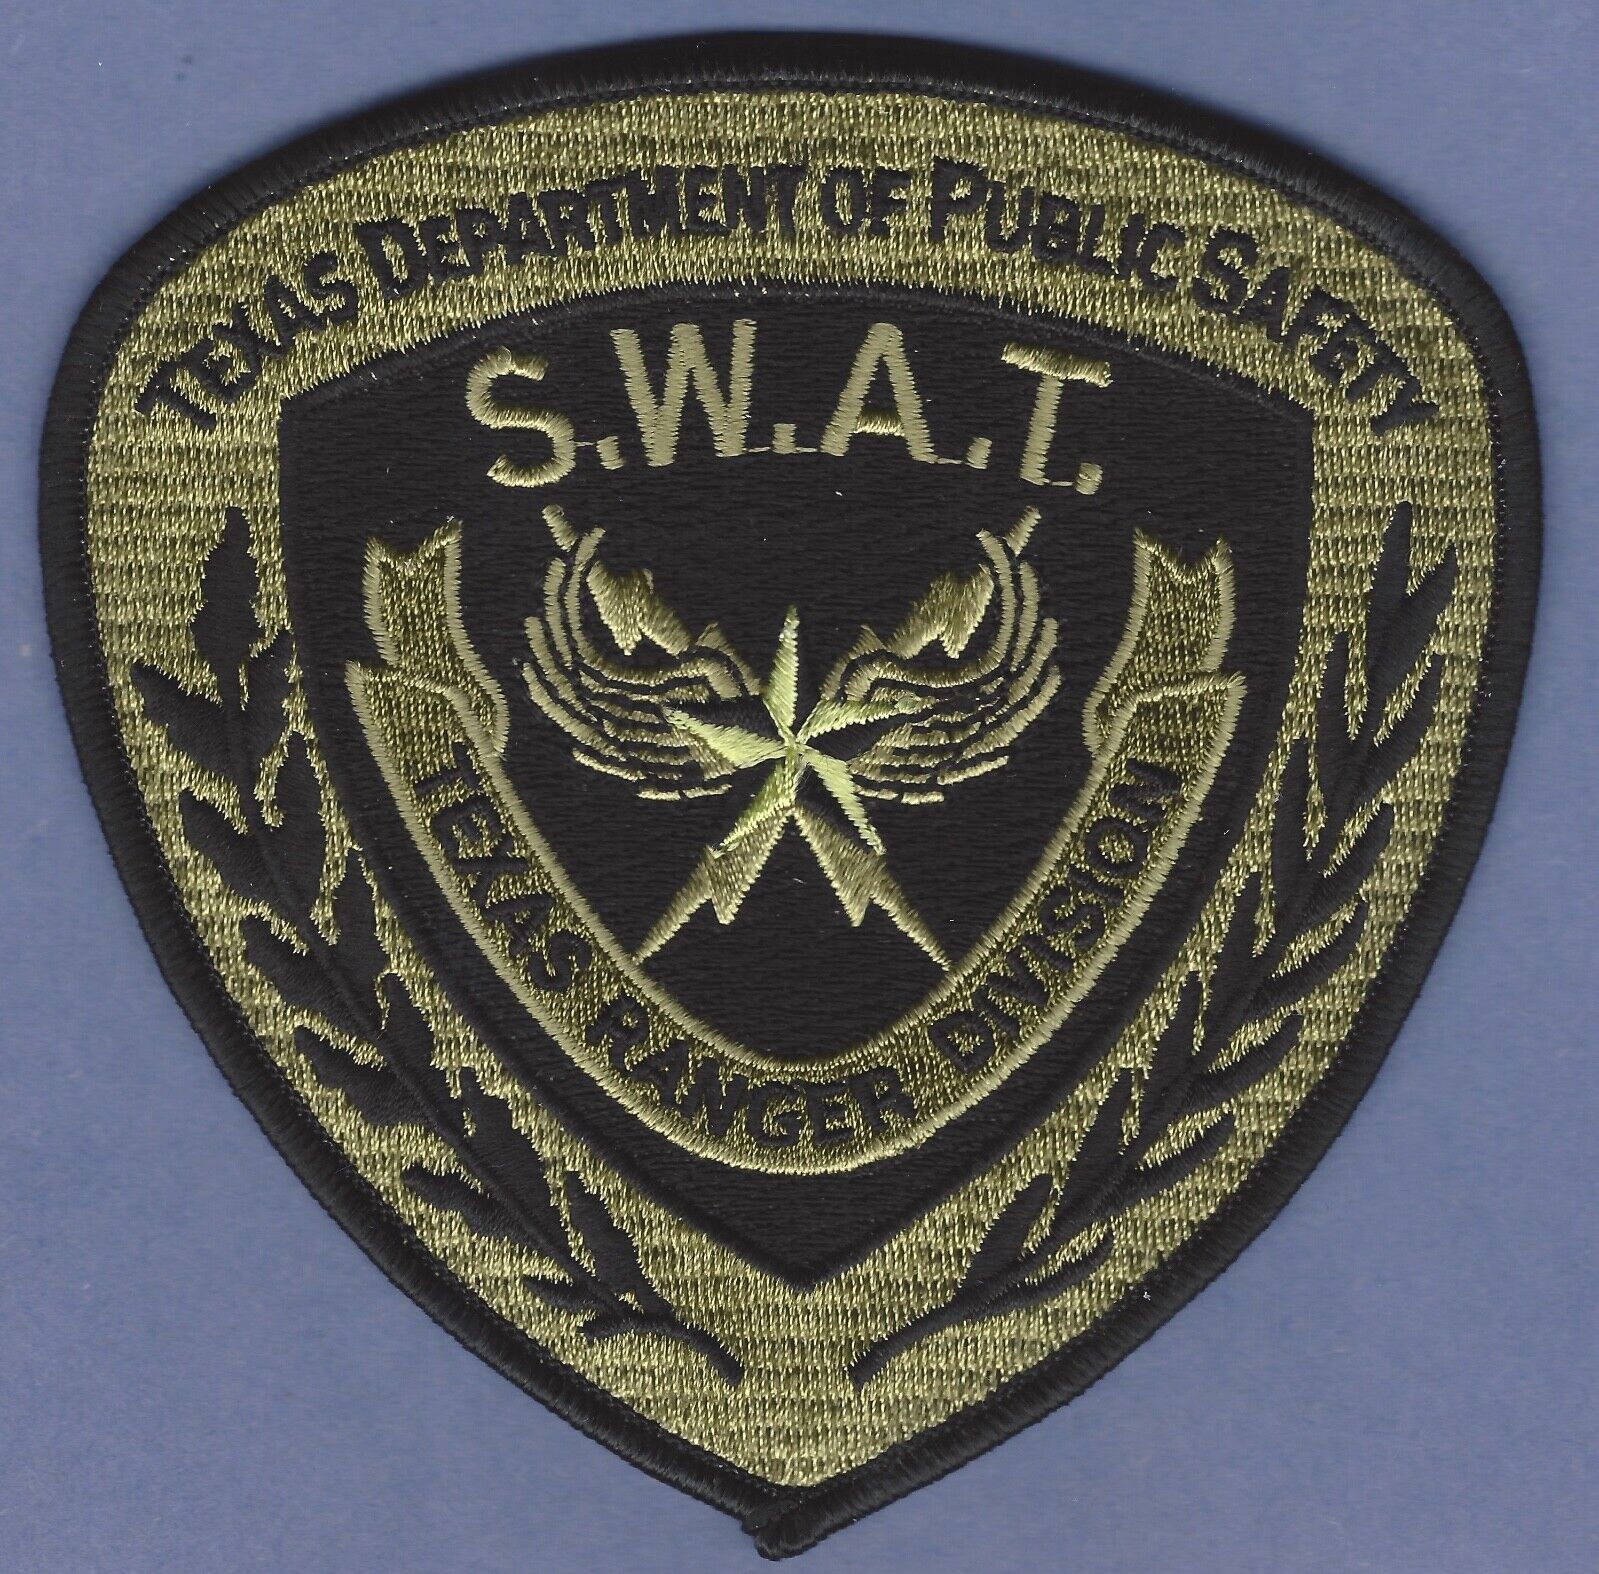 TEXAS RANGER DIVISION DEPARTMENT OF PUBLIC SAFETY SWAT TEAM SHOULDER PATCH GREEN